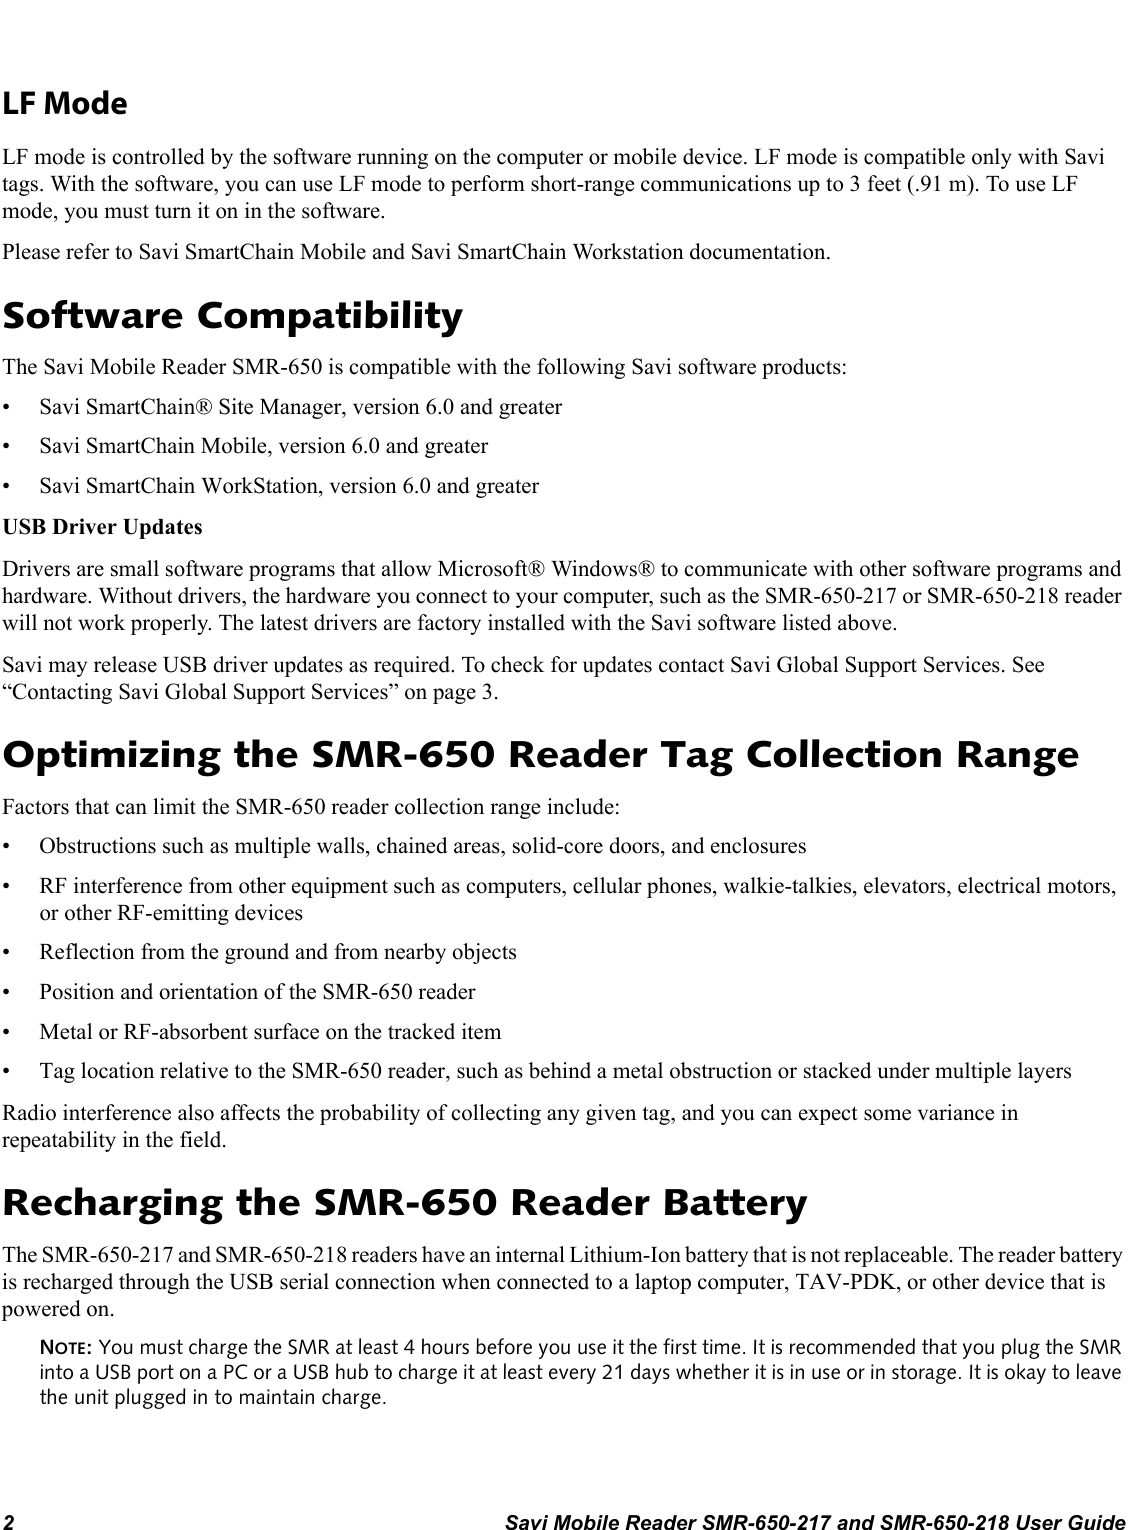 2 Savi Mobile Reader SMR-650-217 and SMR-650-218 User GuideLF ModeLF mode is controlled by the software running on the computer or mobile device. LF mode is compatible only with Savi tags. With the software, you can use LF mode to perform short-range communications up to 3 feet (.91 m). To use LF mode, you must turn it on in the software.Please refer to Savi SmartChain Mobile and Savi SmartChain Workstation documentation.Software CompatibilityThe Savi Mobile Reader SMR-650 is compatible with the following Savi software products:• Savi SmartChain® Site Manager, version 6.0 and greater• Savi SmartChain Mobile, version 6.0 and greater• Savi SmartChain WorkStation, version 6.0 and greaterUSB Driver UpdatesDrivers are small software programs that allow Microsoft® Windows® to communicate with other software programs and hardware. Without drivers, the hardware you connect to your computer, such as the SMR-650-217 or SMR-650-218 reader will not work properly. The latest drivers are factory installed with the Savi software listed above. Savi may release USB driver updates as required. To check for updates contact Savi Global Support Services. See “Contacting Savi Global Support Services” on page 3.Optimizing the SMR-650 Reader Tag Collection RangeFactors that can limit the SMR-650 reader collection range include:• Obstructions such as multiple walls, chained areas, solid-core doors, and enclosures• RF interference from other equipment such as computers, cellular phones, walkie-talkies, elevators, electrical motors, or other RF-emitting devices• Reflection from the ground and from nearby objects• Position and orientation of the SMR-650 reader• Metal or RF-absorbent surface on the tracked item• Tag location relative to the SMR-650 reader, such as behind a metal obstruction or stacked under multiple layersRadio interference also affects the probability of collecting any given tag, and you can expect some variance in repeatability in the field.Recharging the SMR-650 Reader BatteryThe SMR-650-217 and SMR-650-218 readers have an internal Lithium-Ion battery that is not replaceable. The reader battery is recharged through the USB serial connection when connected to a laptop computer, TAV-PDK, or other device that is powered on.NOTE: You must charge the SMR at least 4 hours before you use it the first time. It is recommended that you plug the SMR into a USB port on a PC or a USB hub to charge it at least every 21 days whether it is in use or in storage. It is okay to leave the unit plugged in to maintain charge.